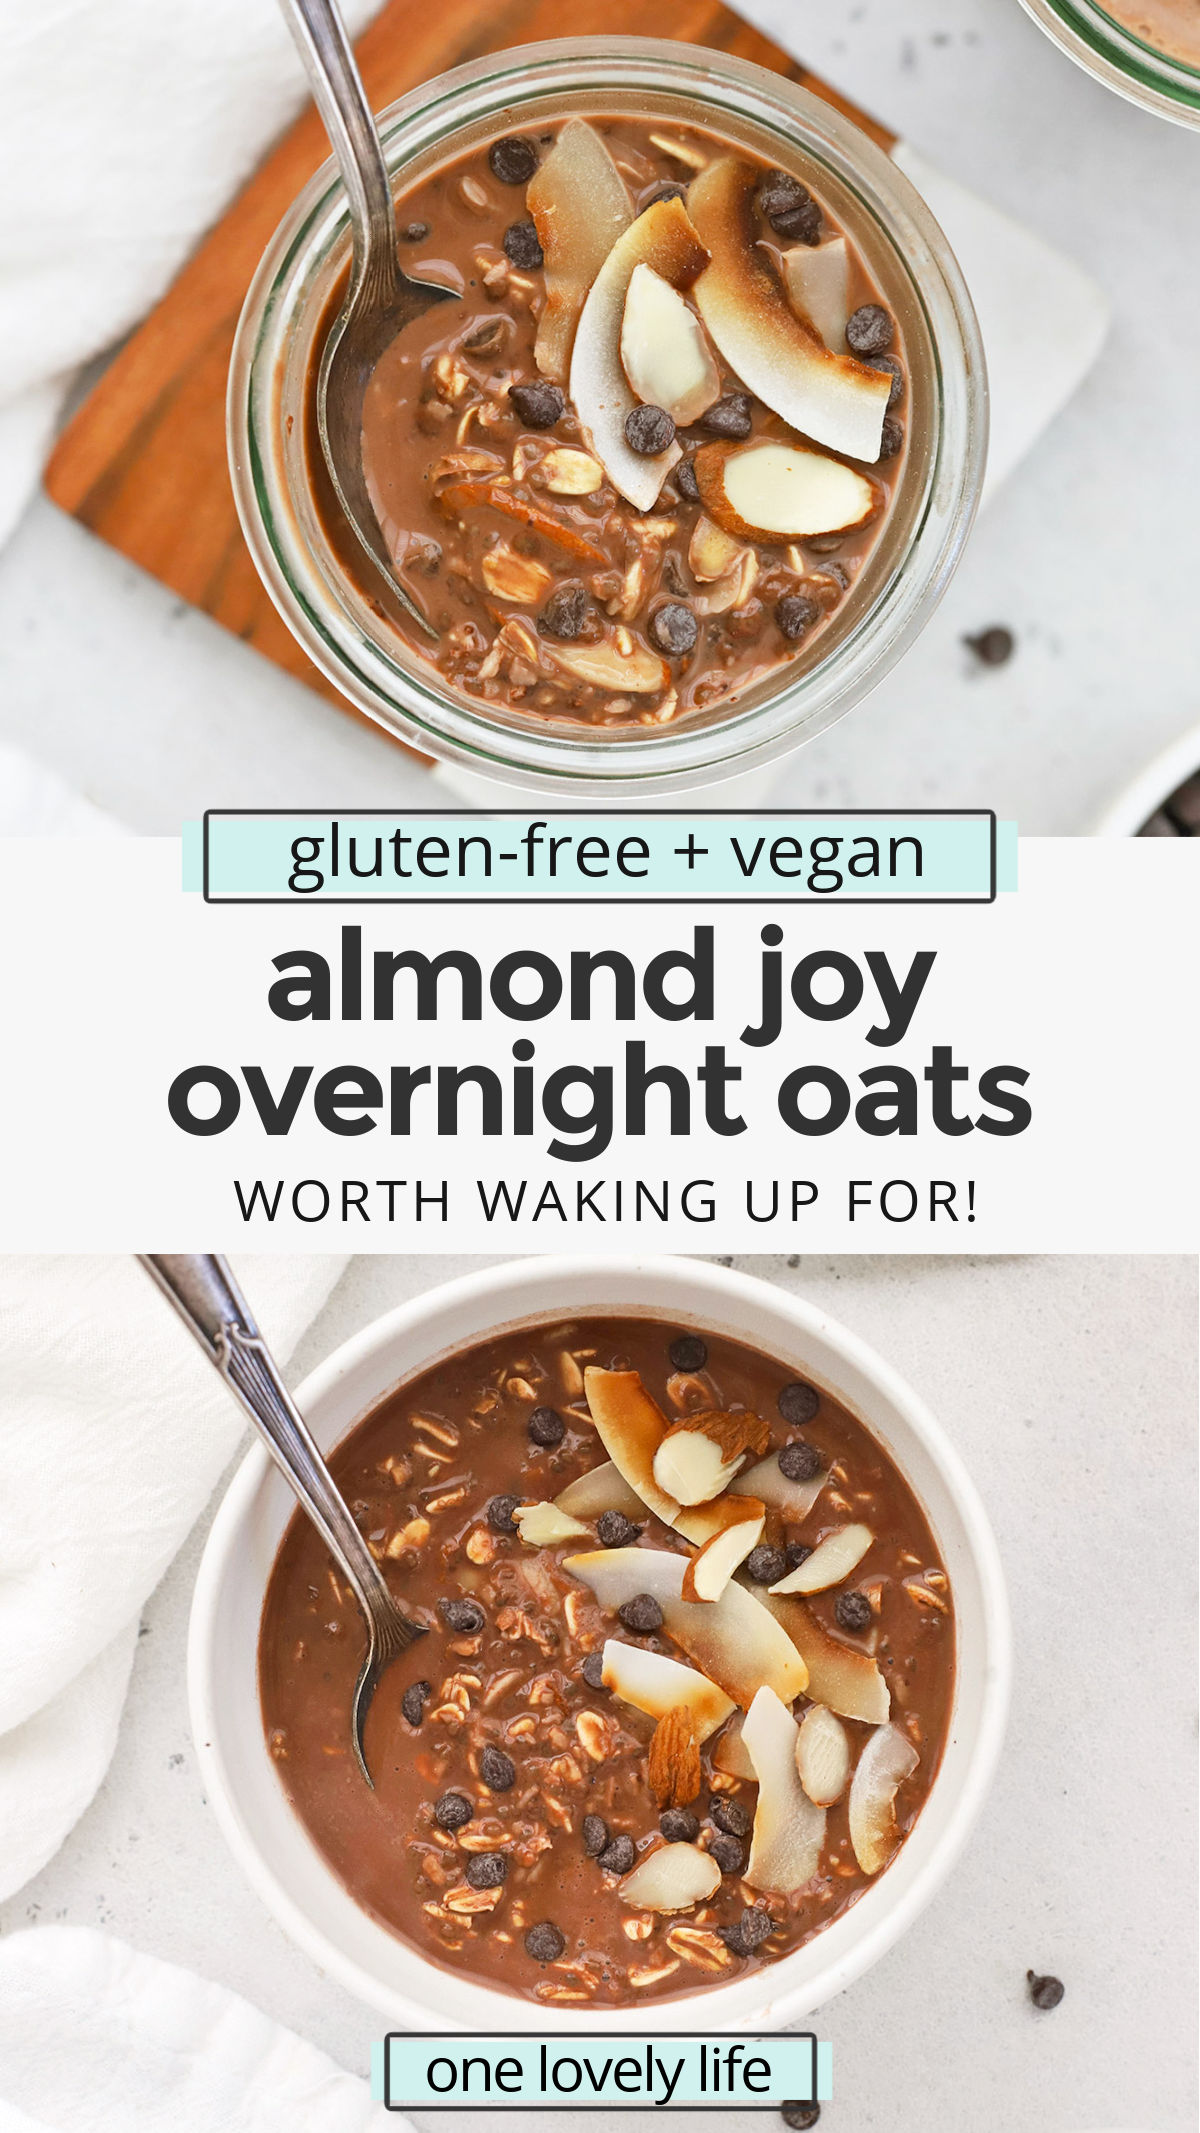 Almond Joy Overnight Oats - These creamy chocolate coconut overnight oats feel like such a treat to wake up to! (Vegan, Gluten-Free) // Healthy Breakfast // Vegan Breakfast // Gluten Free Breakfast // Chocolate Overnight Oats // Vegan Overnight Oats #almondjoy #overnightoats #healthybreakfast #vegan #glutenfree